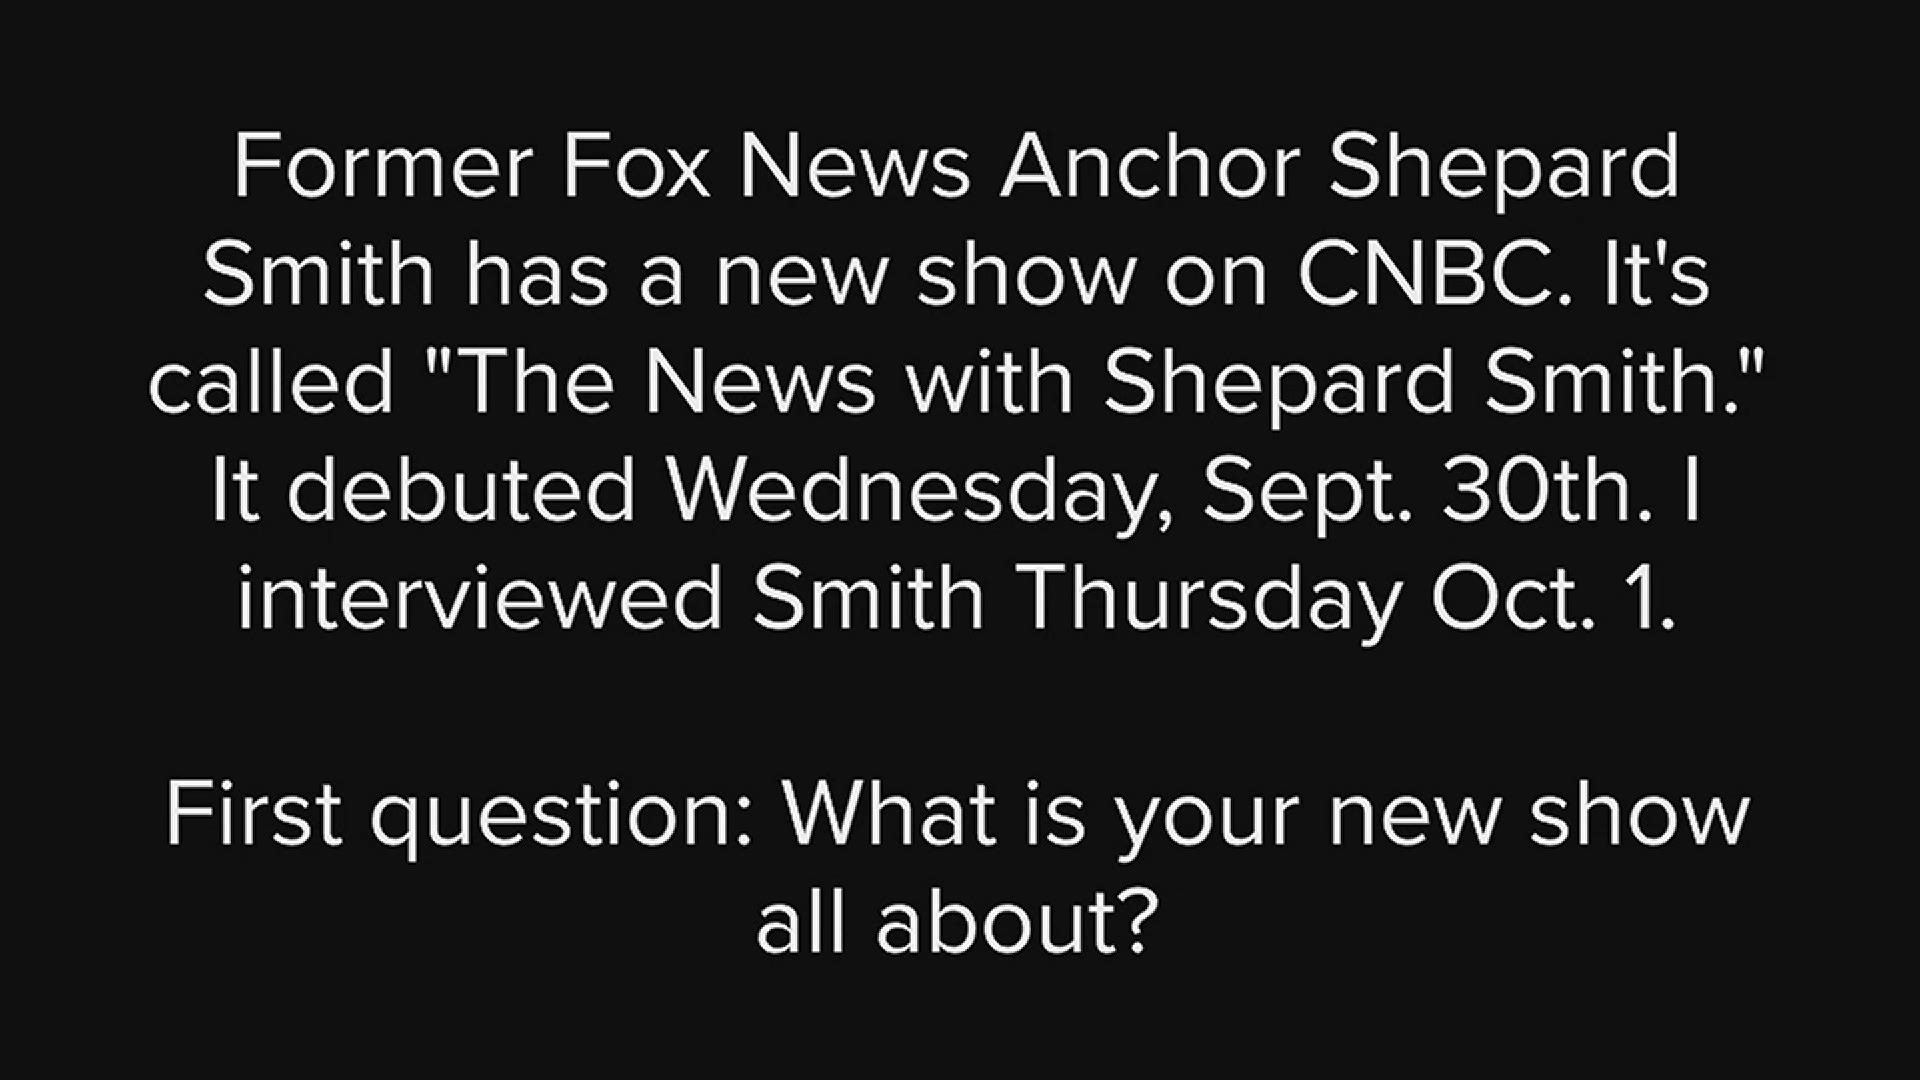 12 News exclusive interview with Shepard Smith, formerly with Fox News, about his new CNBC show "The News with Shepard Smith". The show debuted on Sept. 30.